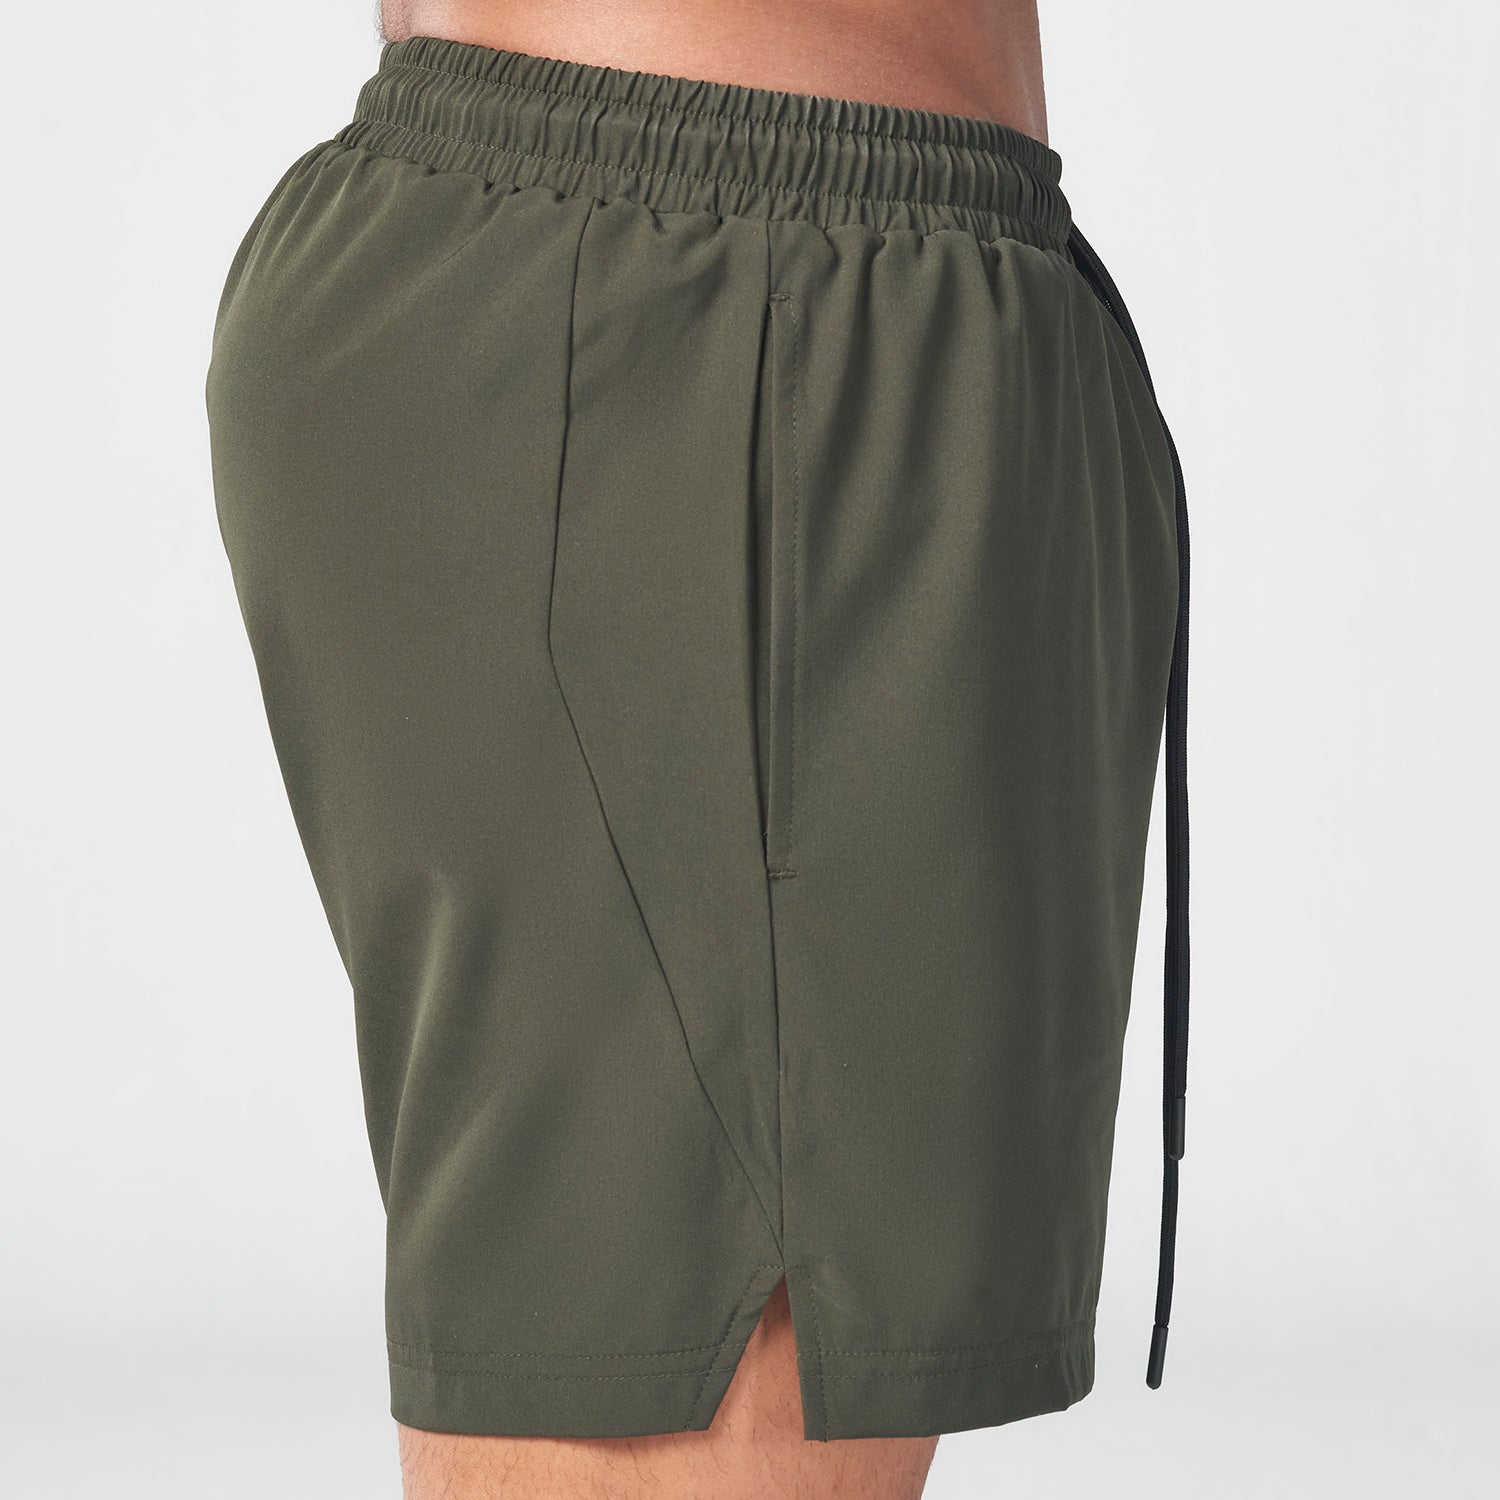 CE' CERDR Mens Athletic Workout Shorts with Pockets and Elastic